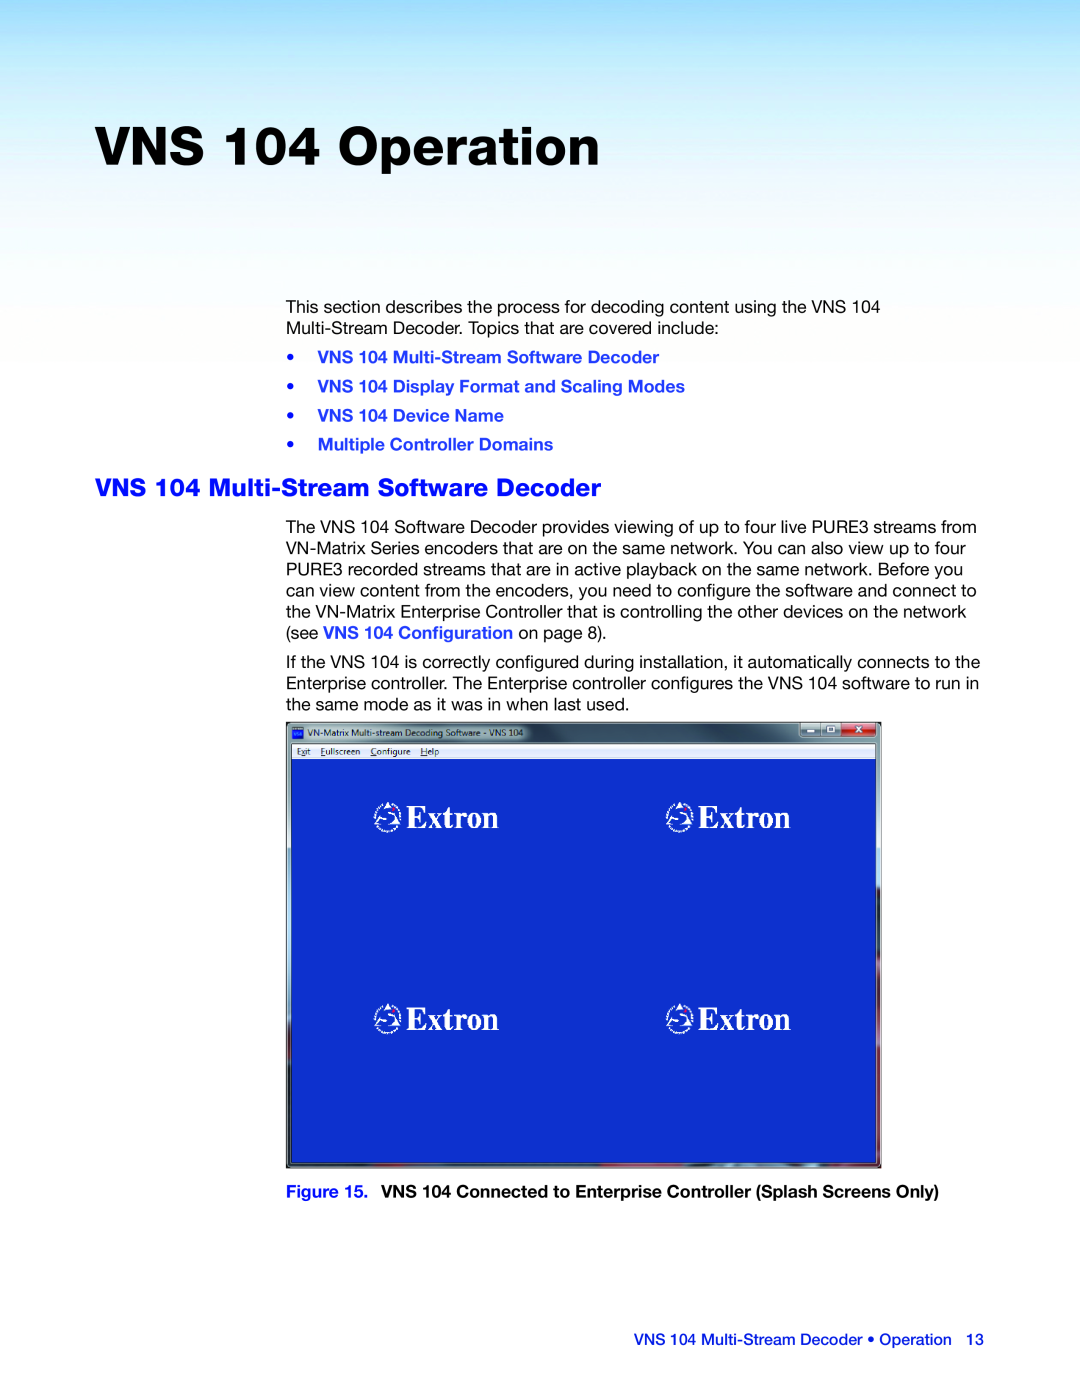 Extron electronic VNS 104 Operation, VNS 104 Multi‑Stream Software Decoder, VNS 104 Display Format and Scaling Modes 